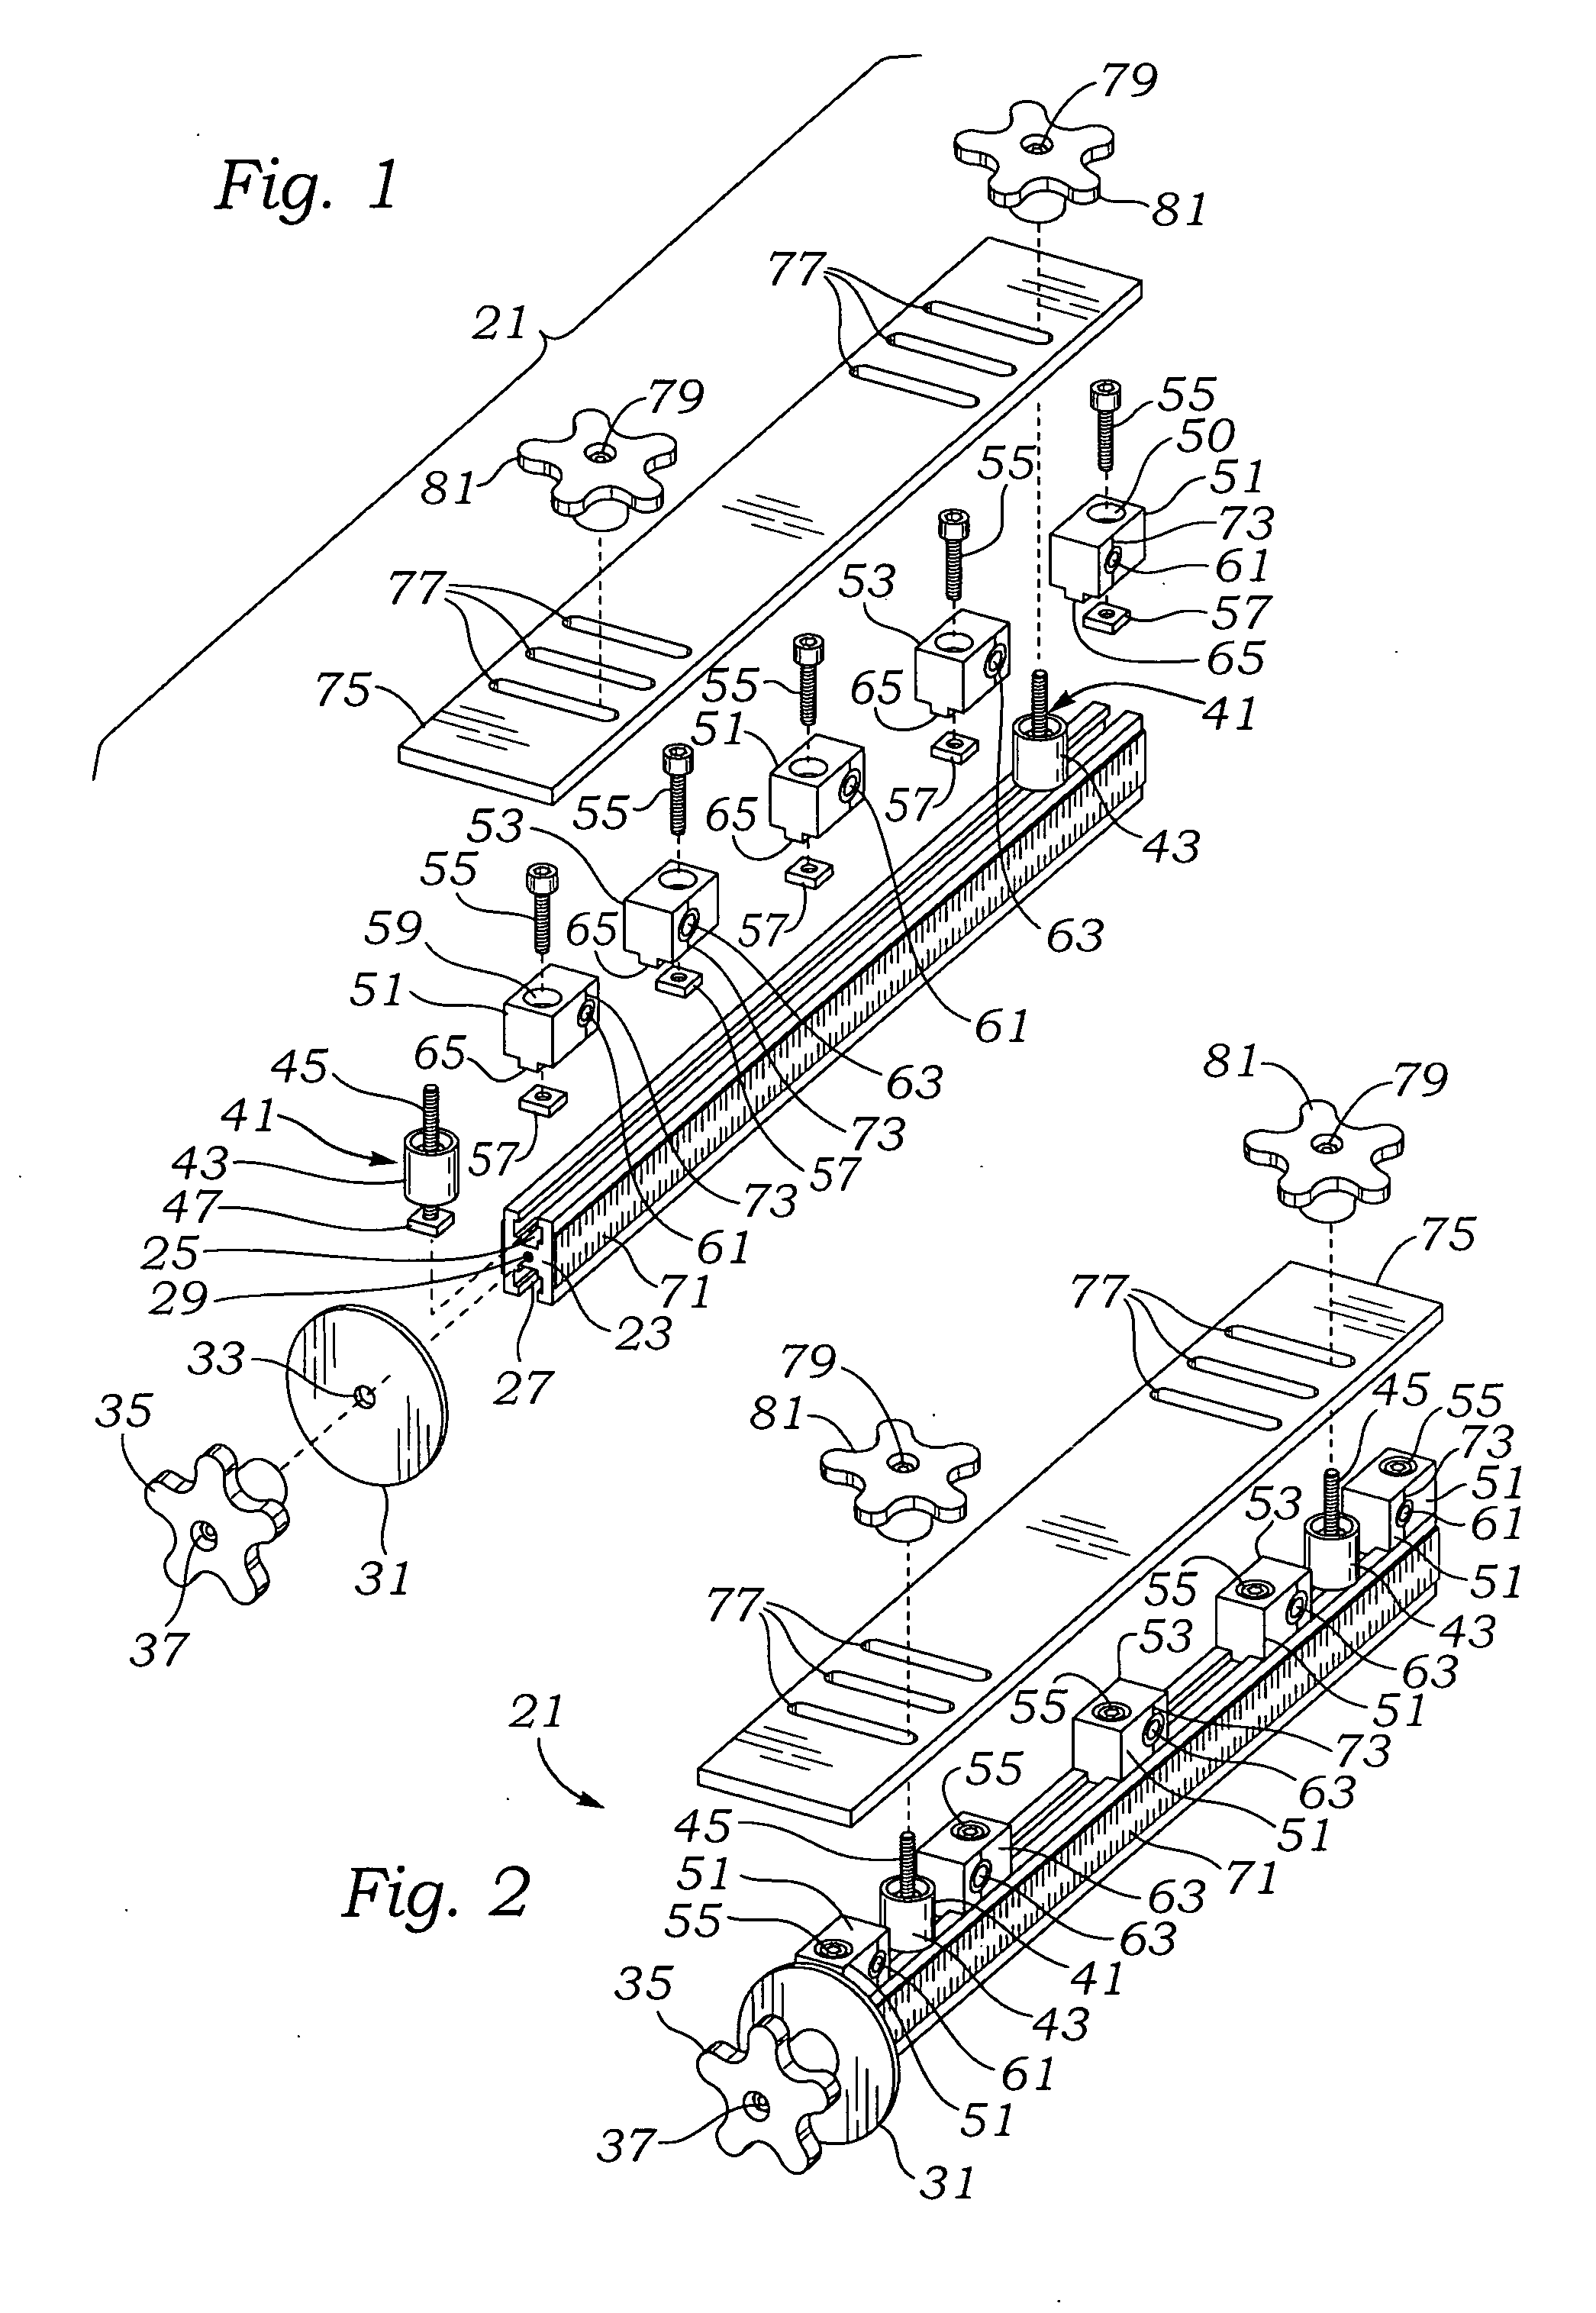 Cabinet assembly bore indexing tool and method